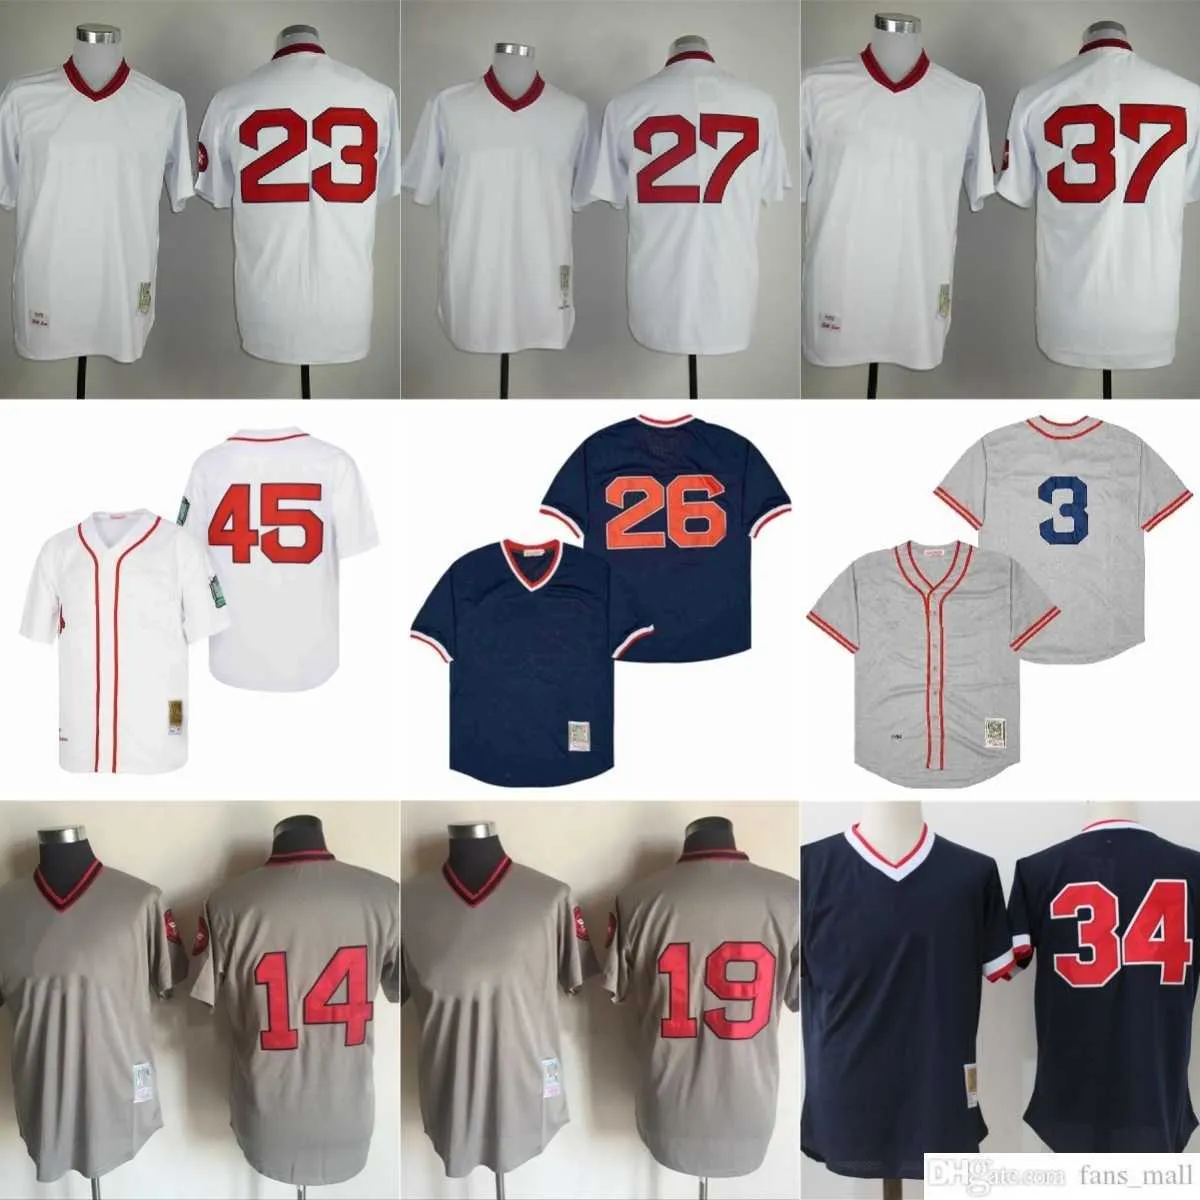 1938 Throwback Vintage Baseball 34 David Ortiz Jerseys NCAA Stitched 26 Wade Boggs 14 Jim Rice Jersey Breattable Sport Navy Pullover White Grey